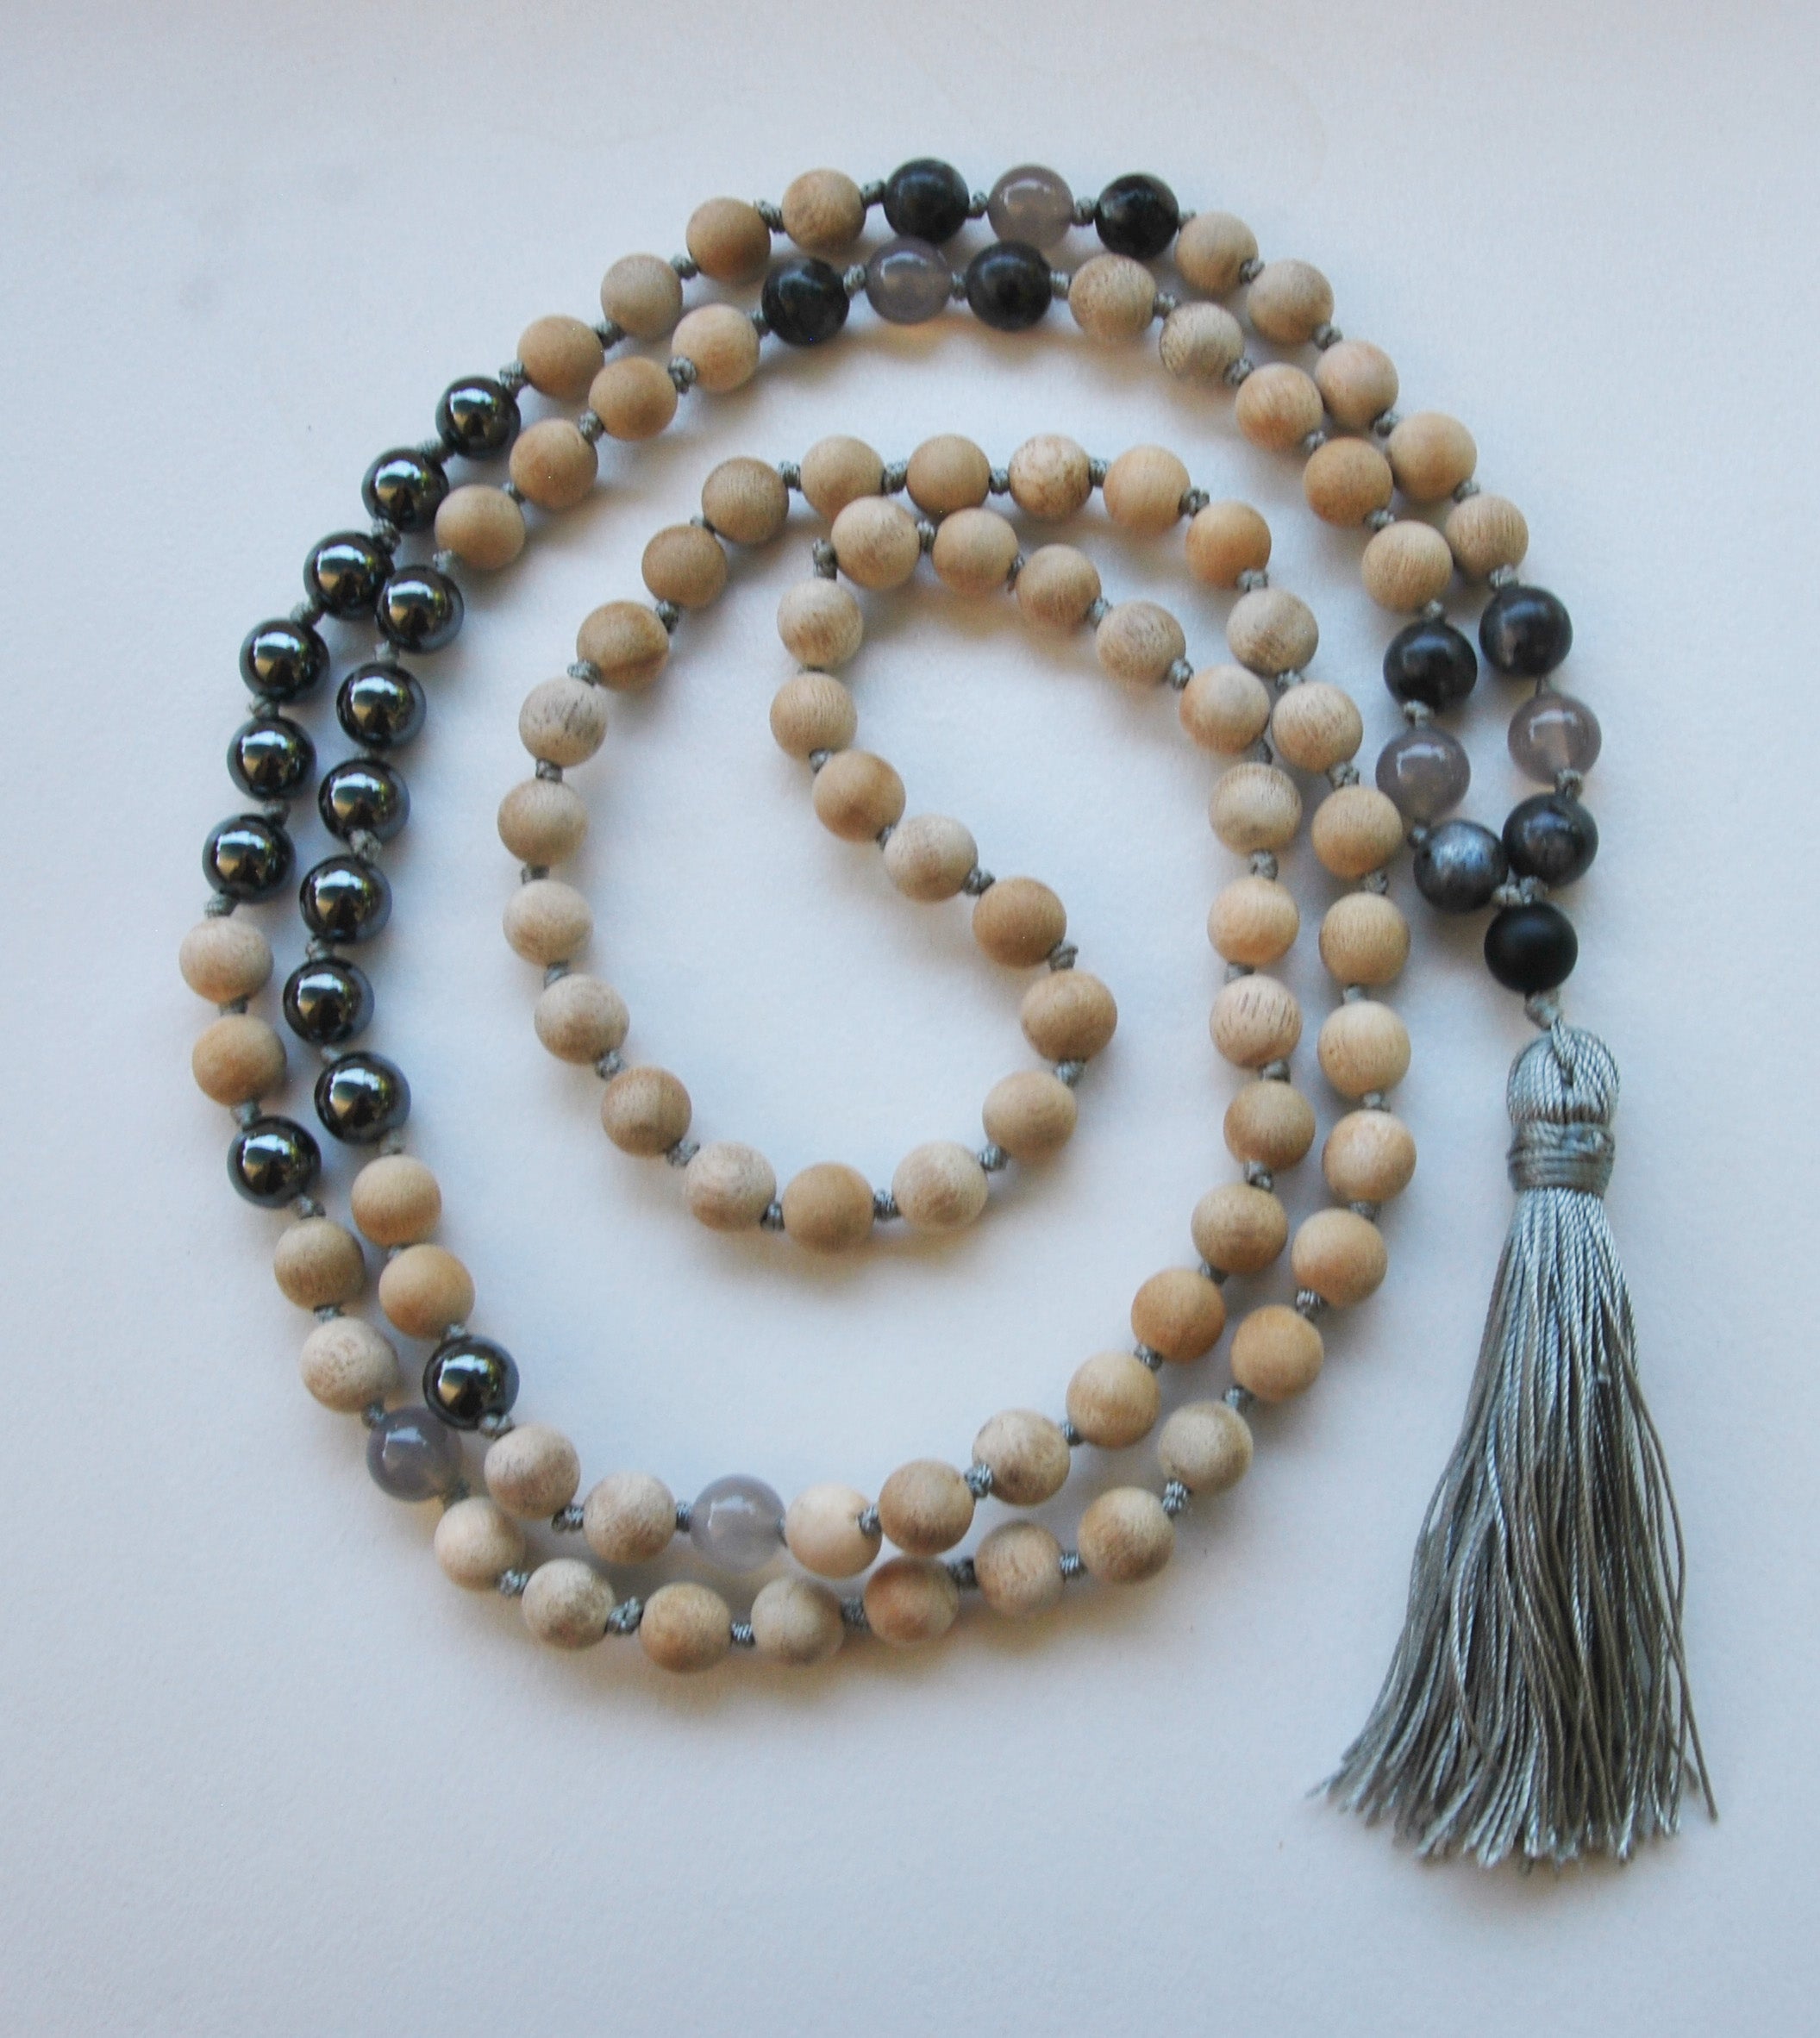 8mm Sandalwood & Hematite 108 Knotted Mala Necklace with Colored Tassel